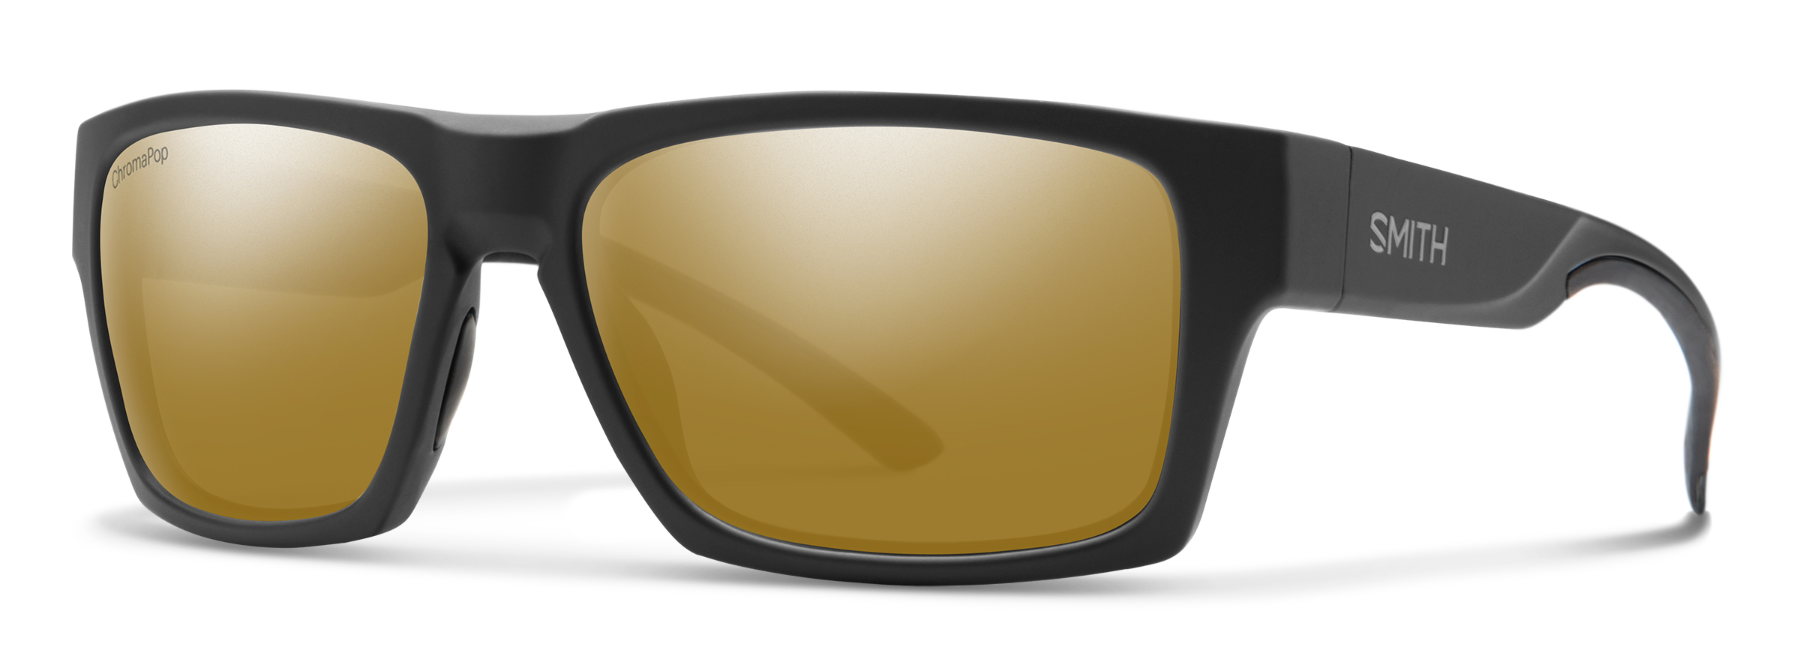 SMITH Outlier 2 sunglasses in black with polarized brown mirror lenses.